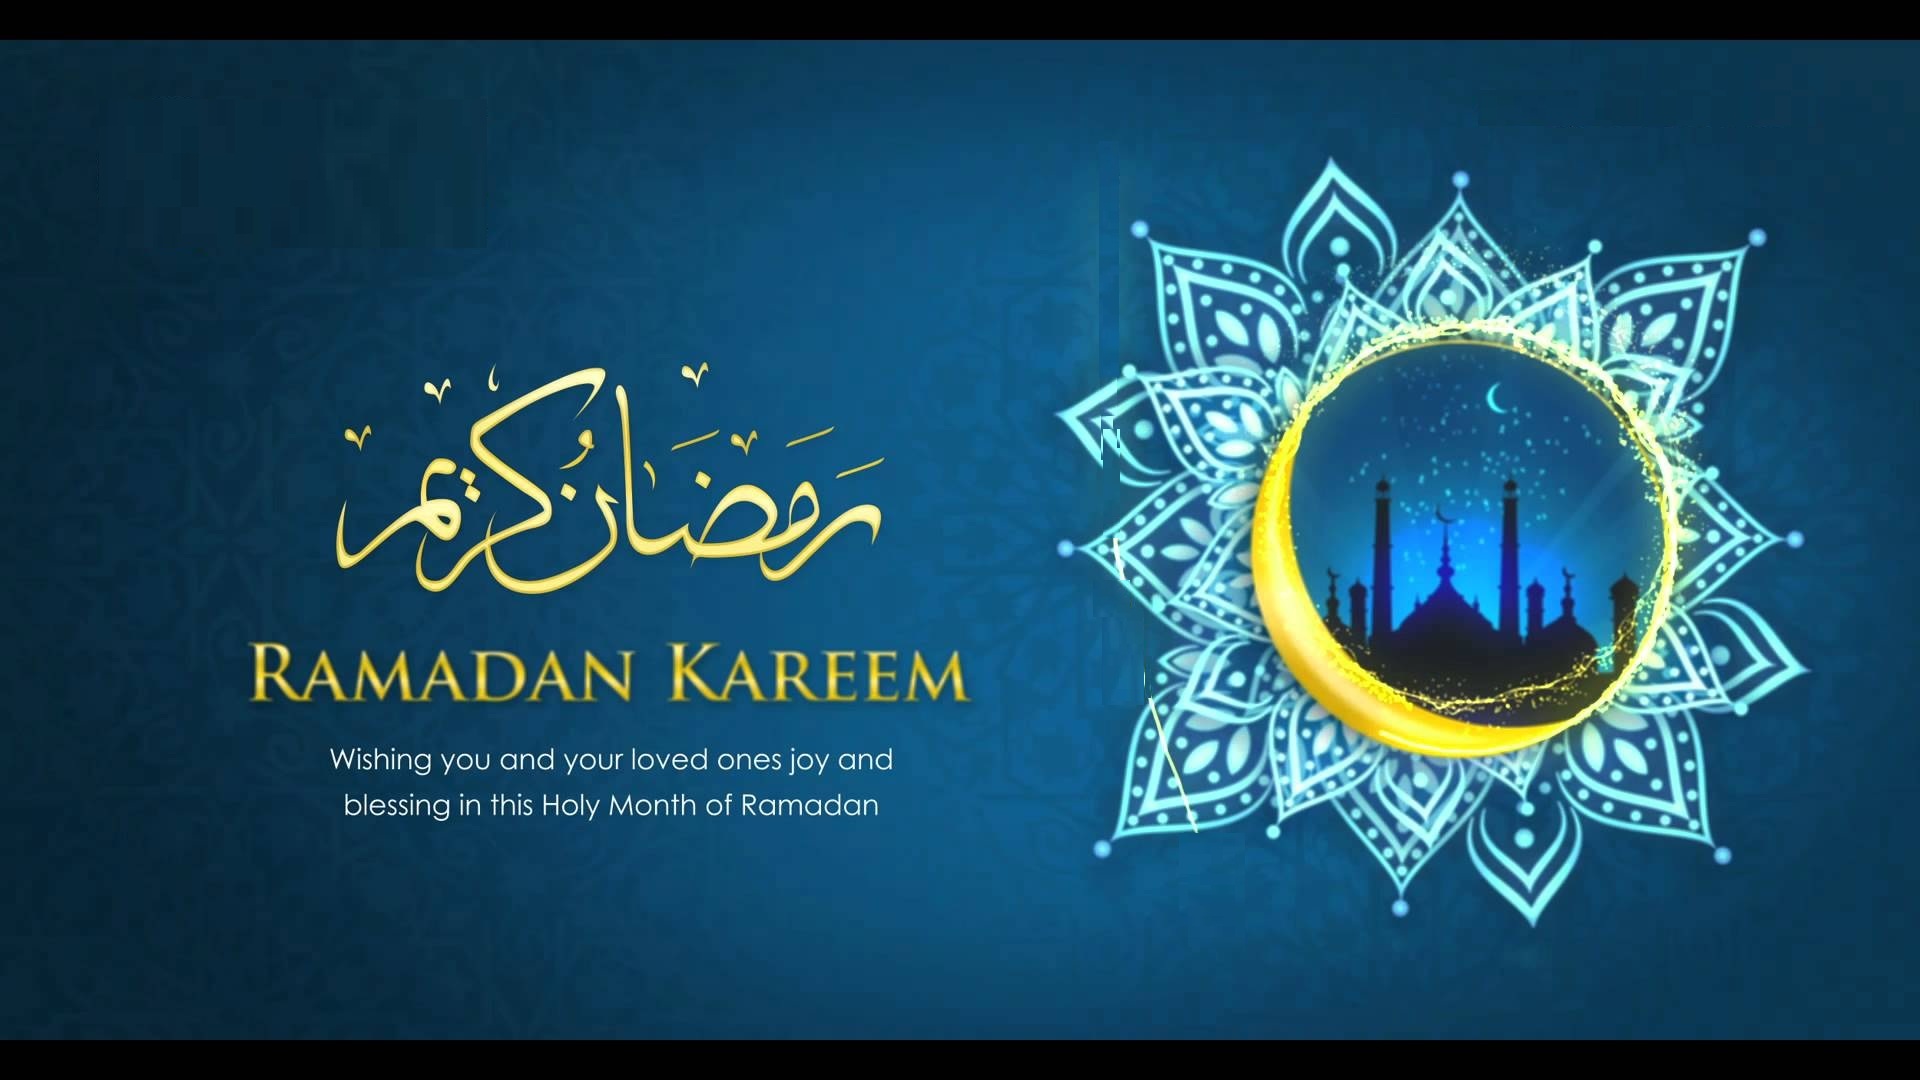 Ramadan Greetings, Wishes, & Images| - My Site